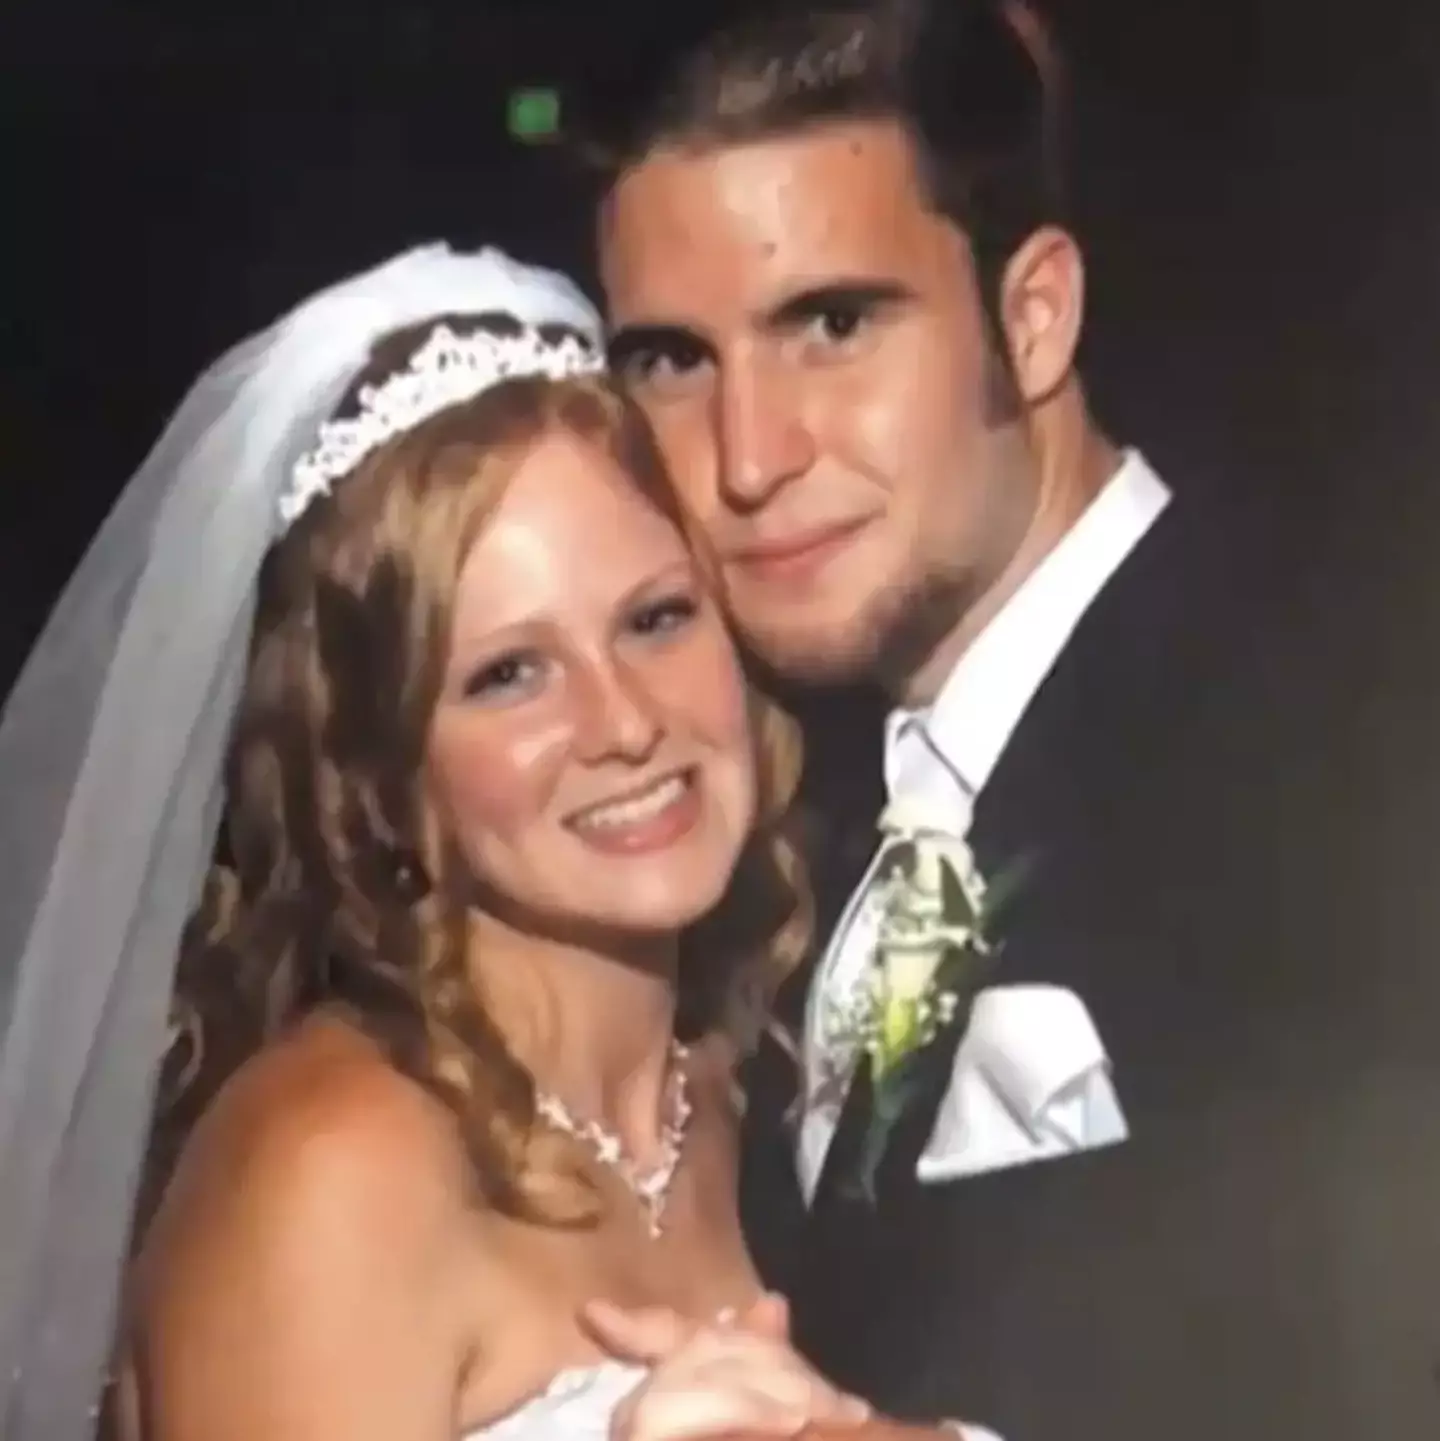 Kris and Brandon got married in 2006.